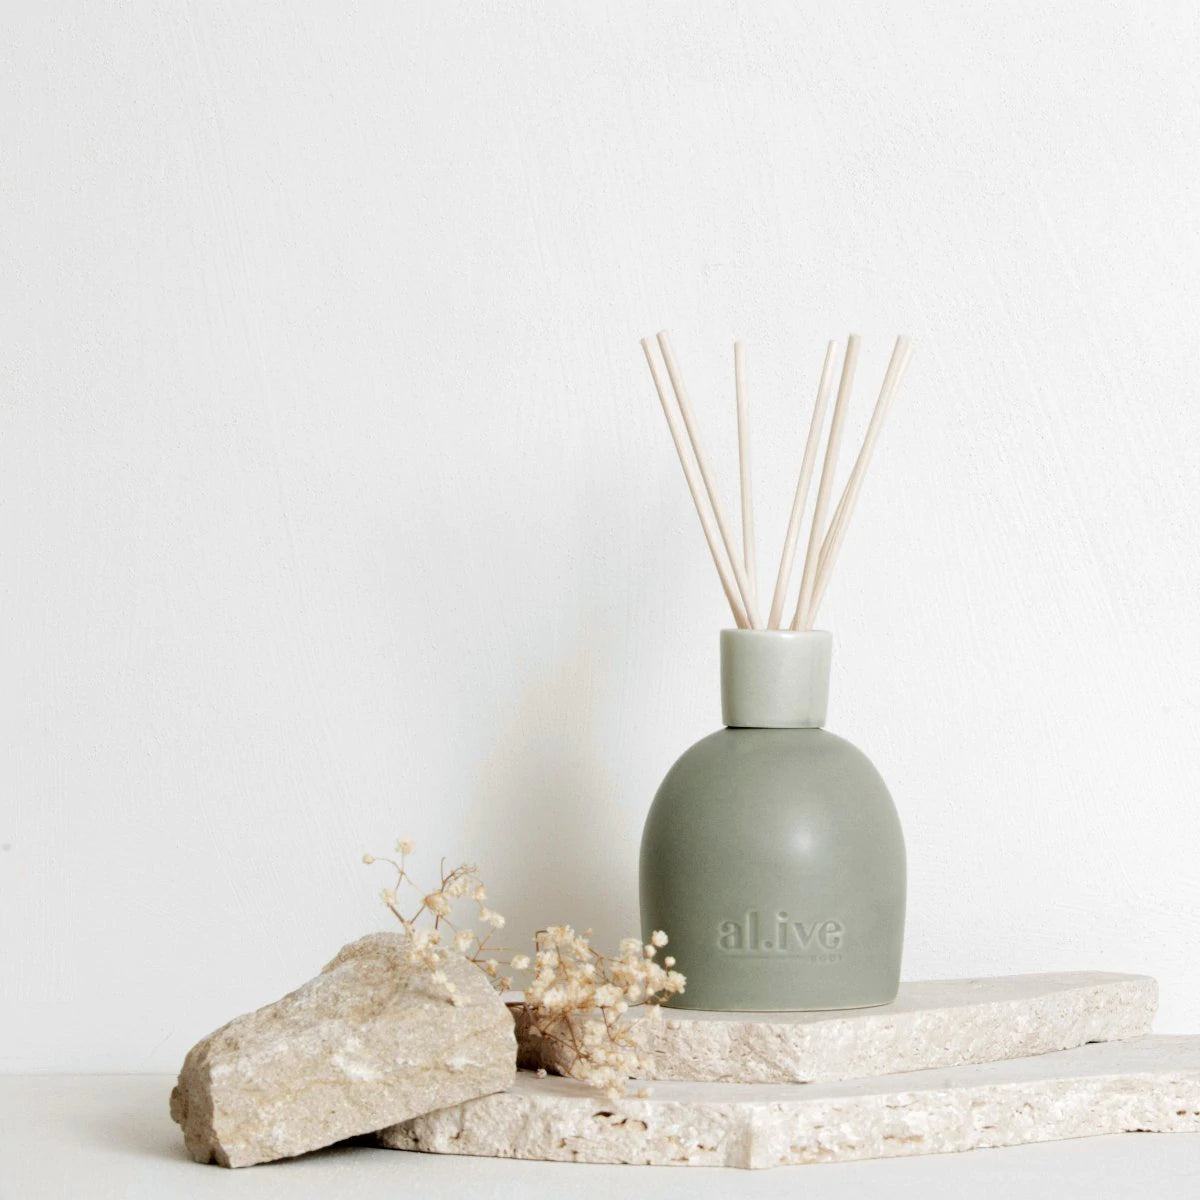 ALIVE BODY blackcurrant caribbean wood diffuser | ALIVE BODY  | the ivy plant studio 